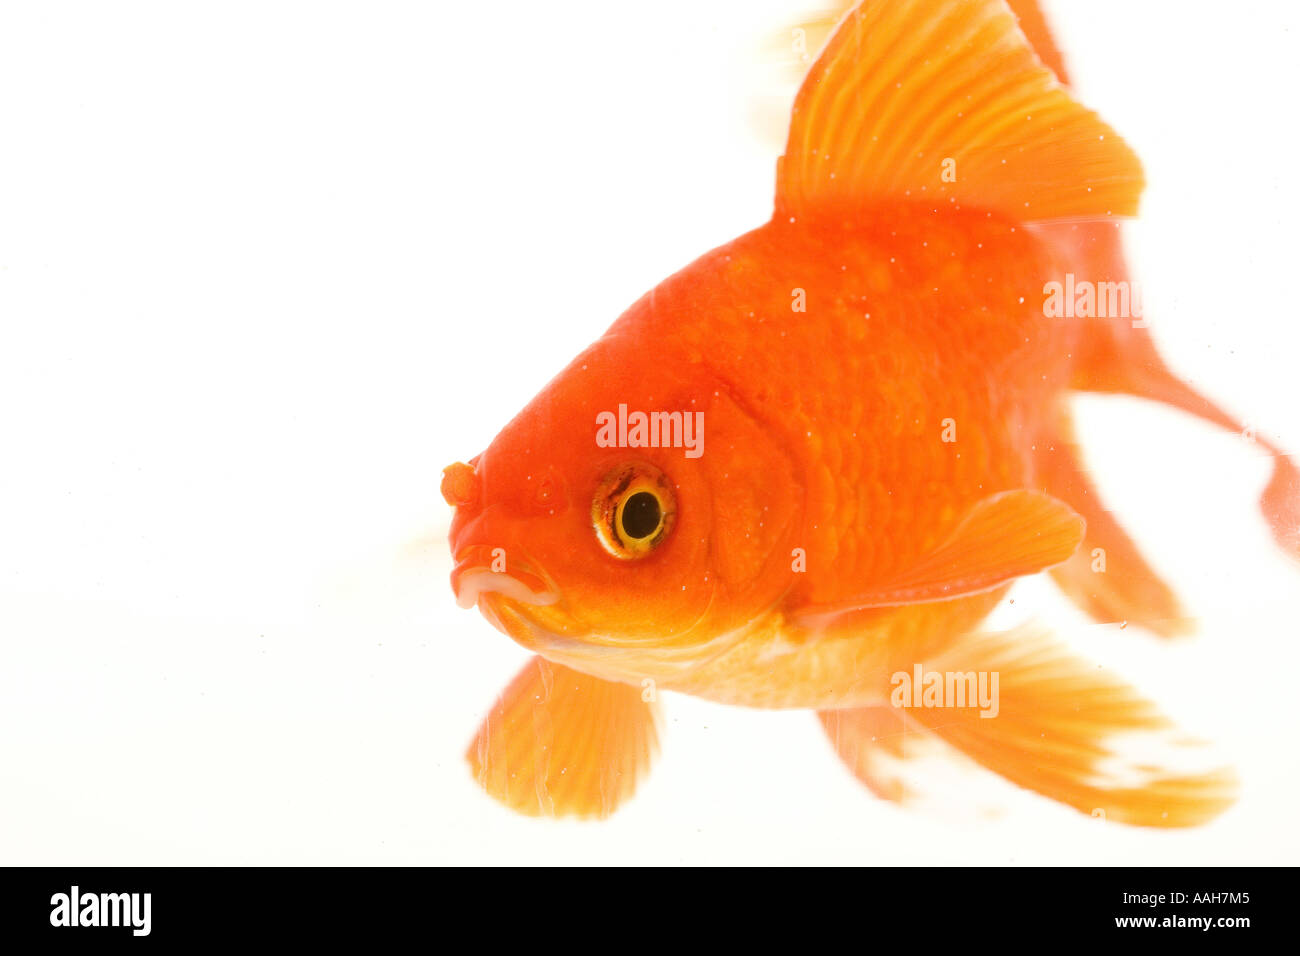 One Goldfish representing Patient enduring tolerant uncomplicated serene uncomplicated simple straightforward basic unfussy Stock Photo